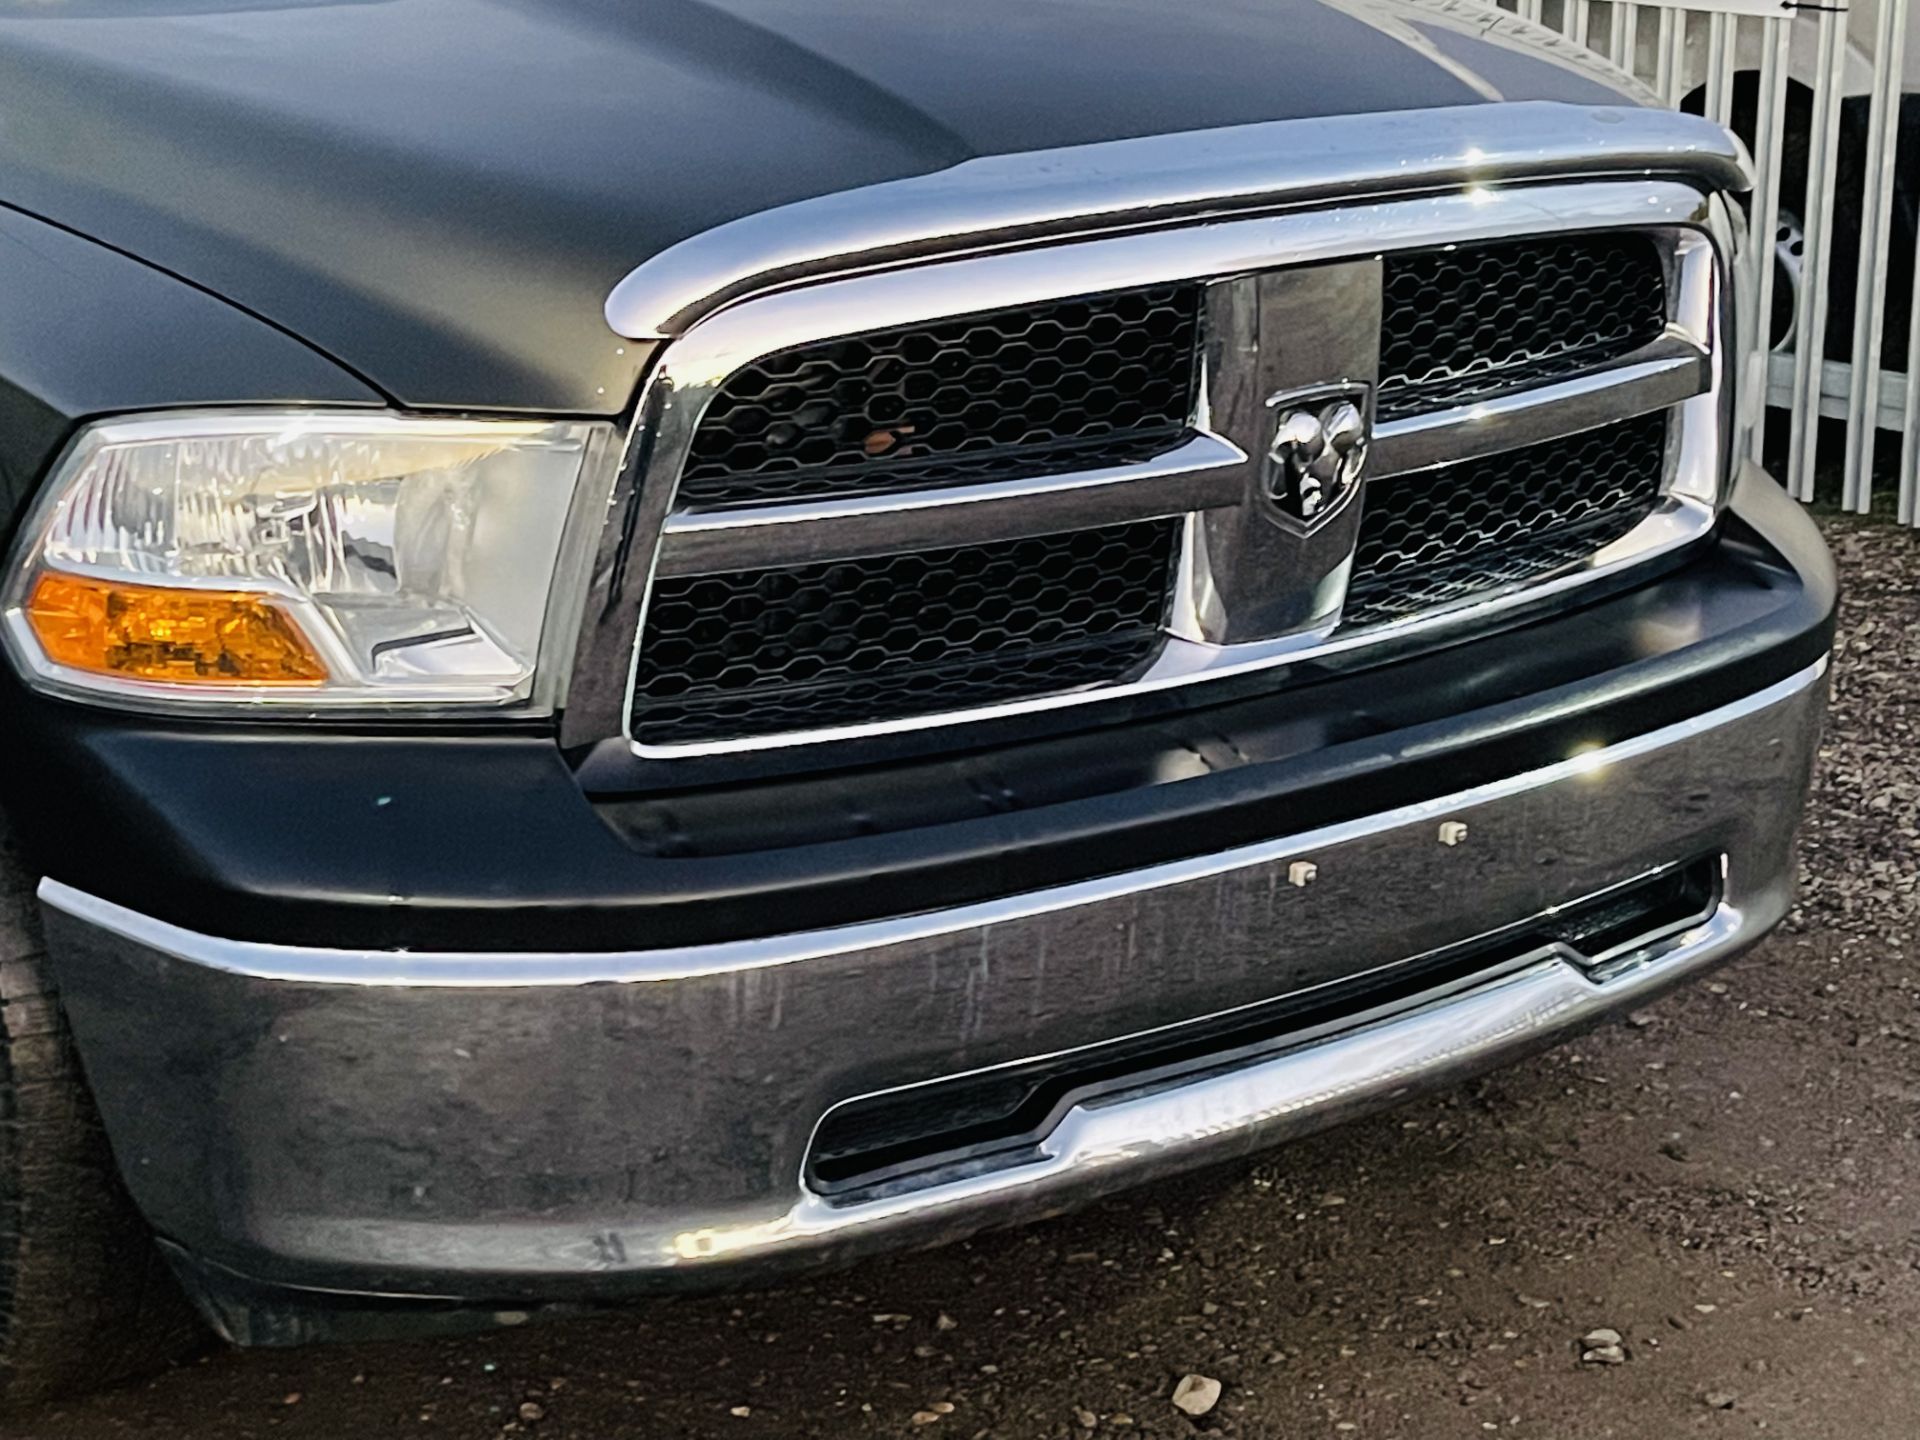 ** ON SALE **Dodge Ram 4.7 V8 1500 ST 4WD ' 2012 Year ' A/C - Cruise Control - 6 Seats Chrome Pack - Image 5 of 27